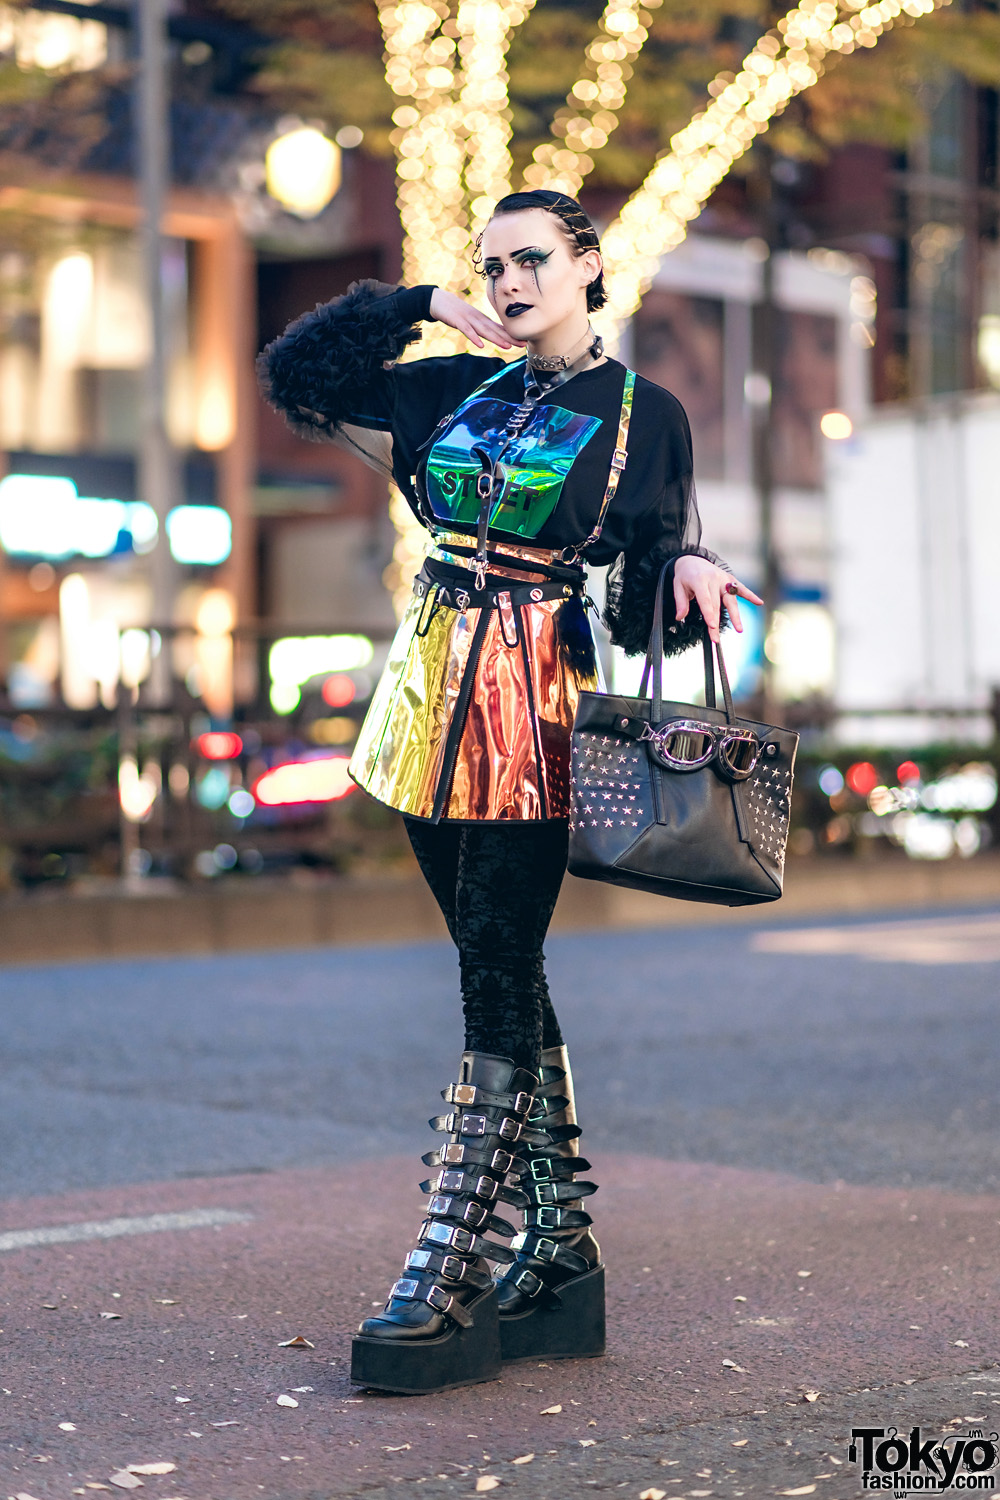 Harajuku Goth Girl Street Style w/ Holographic Romper, Multi-Strap Boots, Leather Harness, Stray Girl Street, Club Exx, Demonia & Listen Flavor